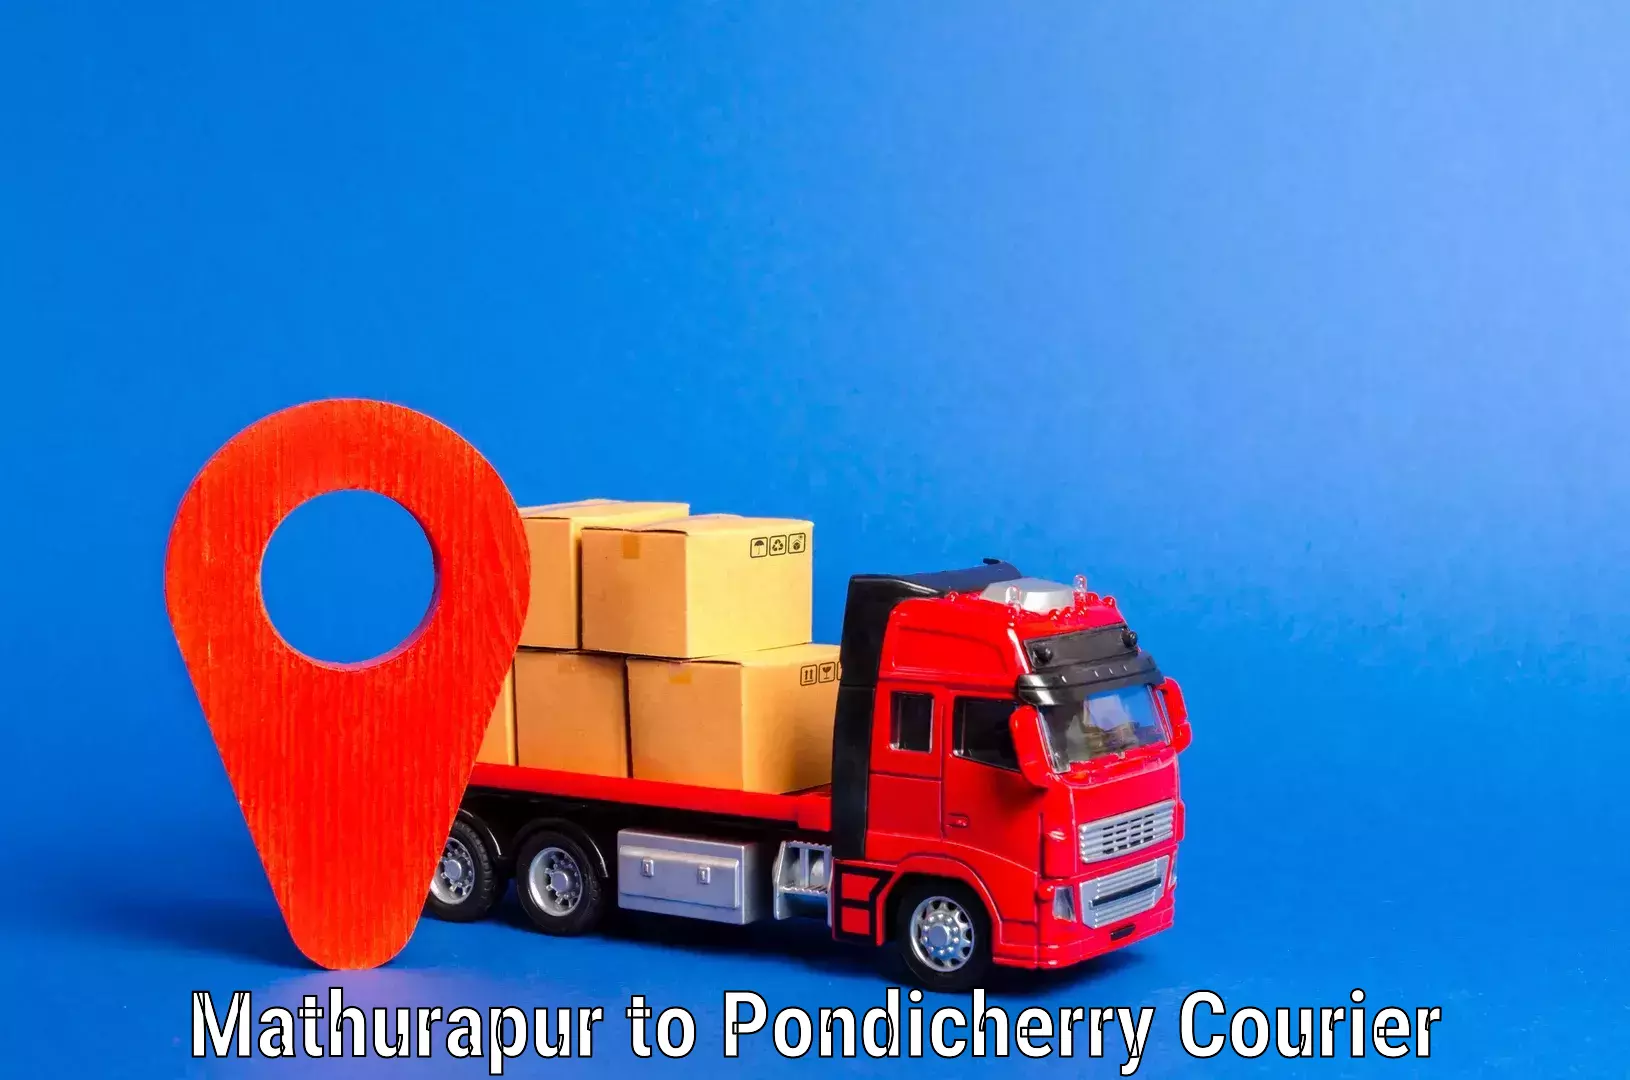 Furniture moving assistance Mathurapur to Pondicherry